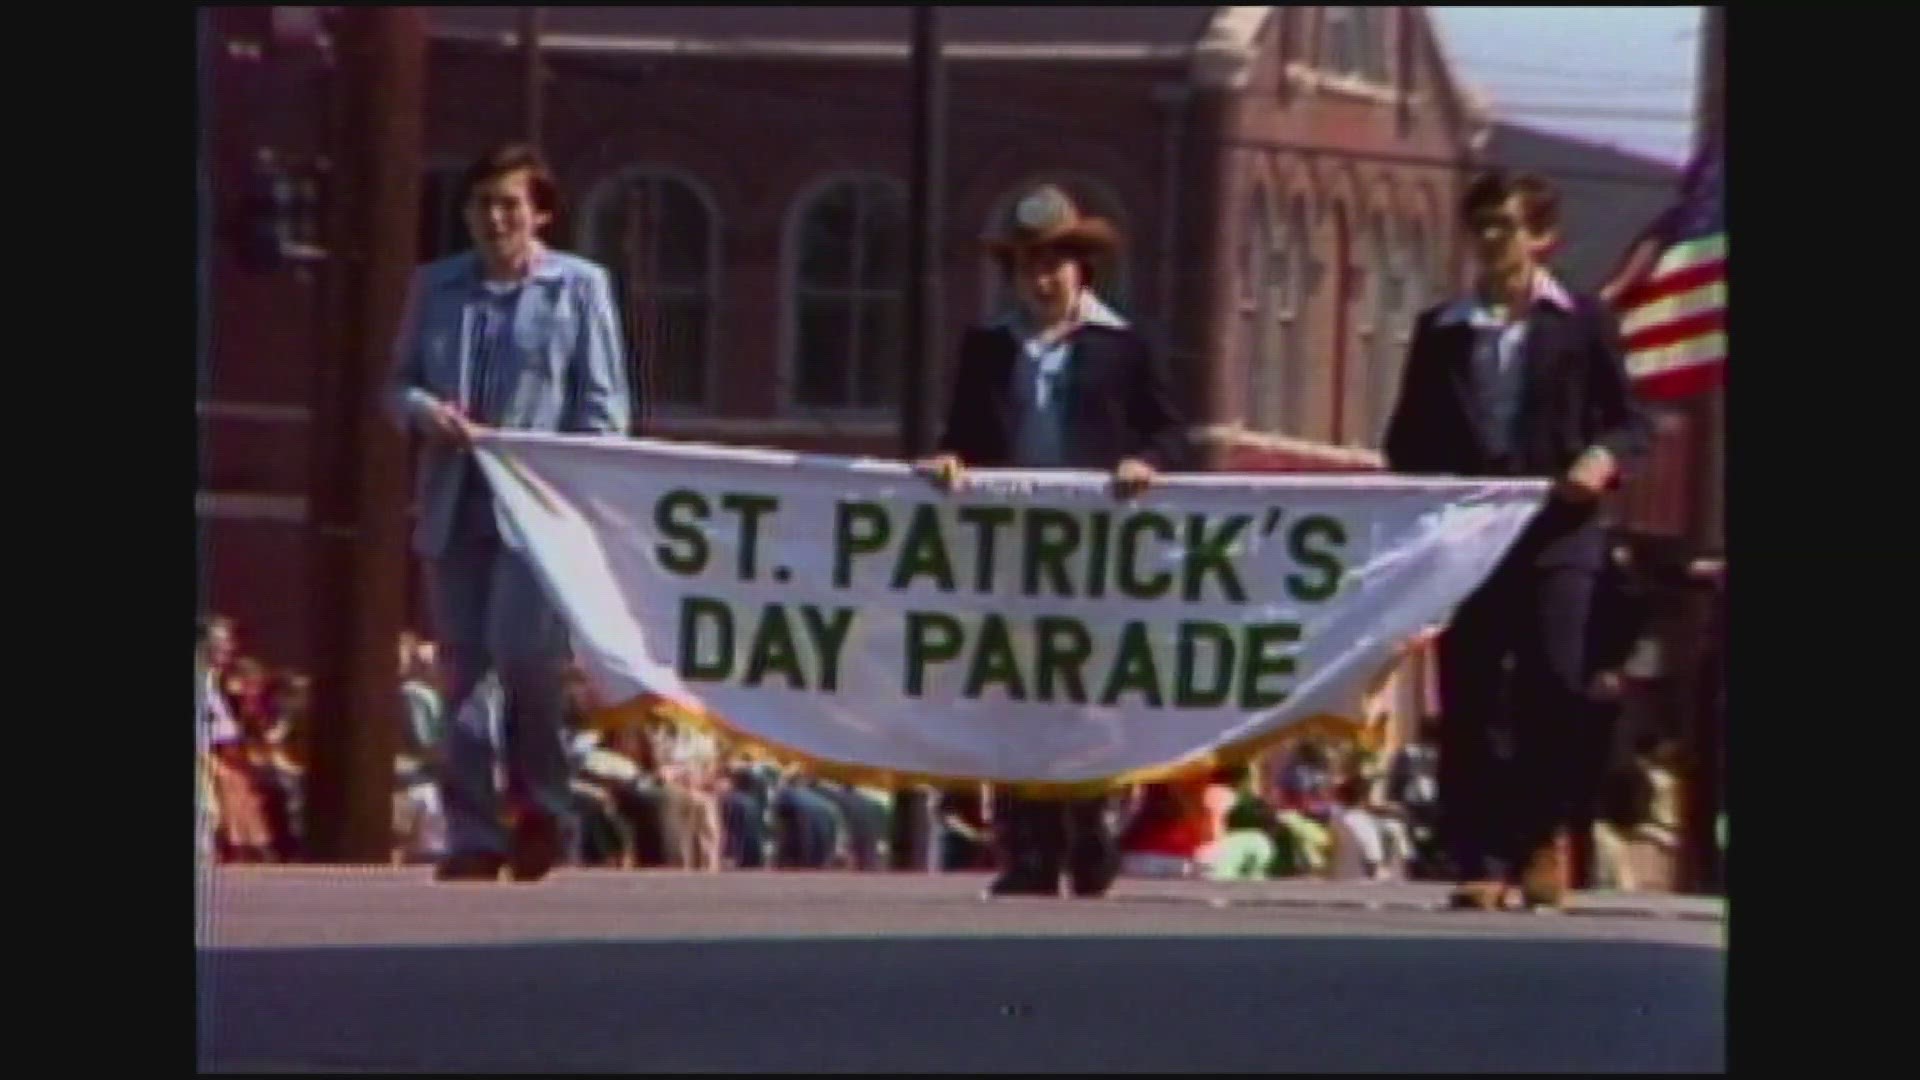 The parade was brought back in the 1970's and now, 50 years later, Louisvillians still celebrate.